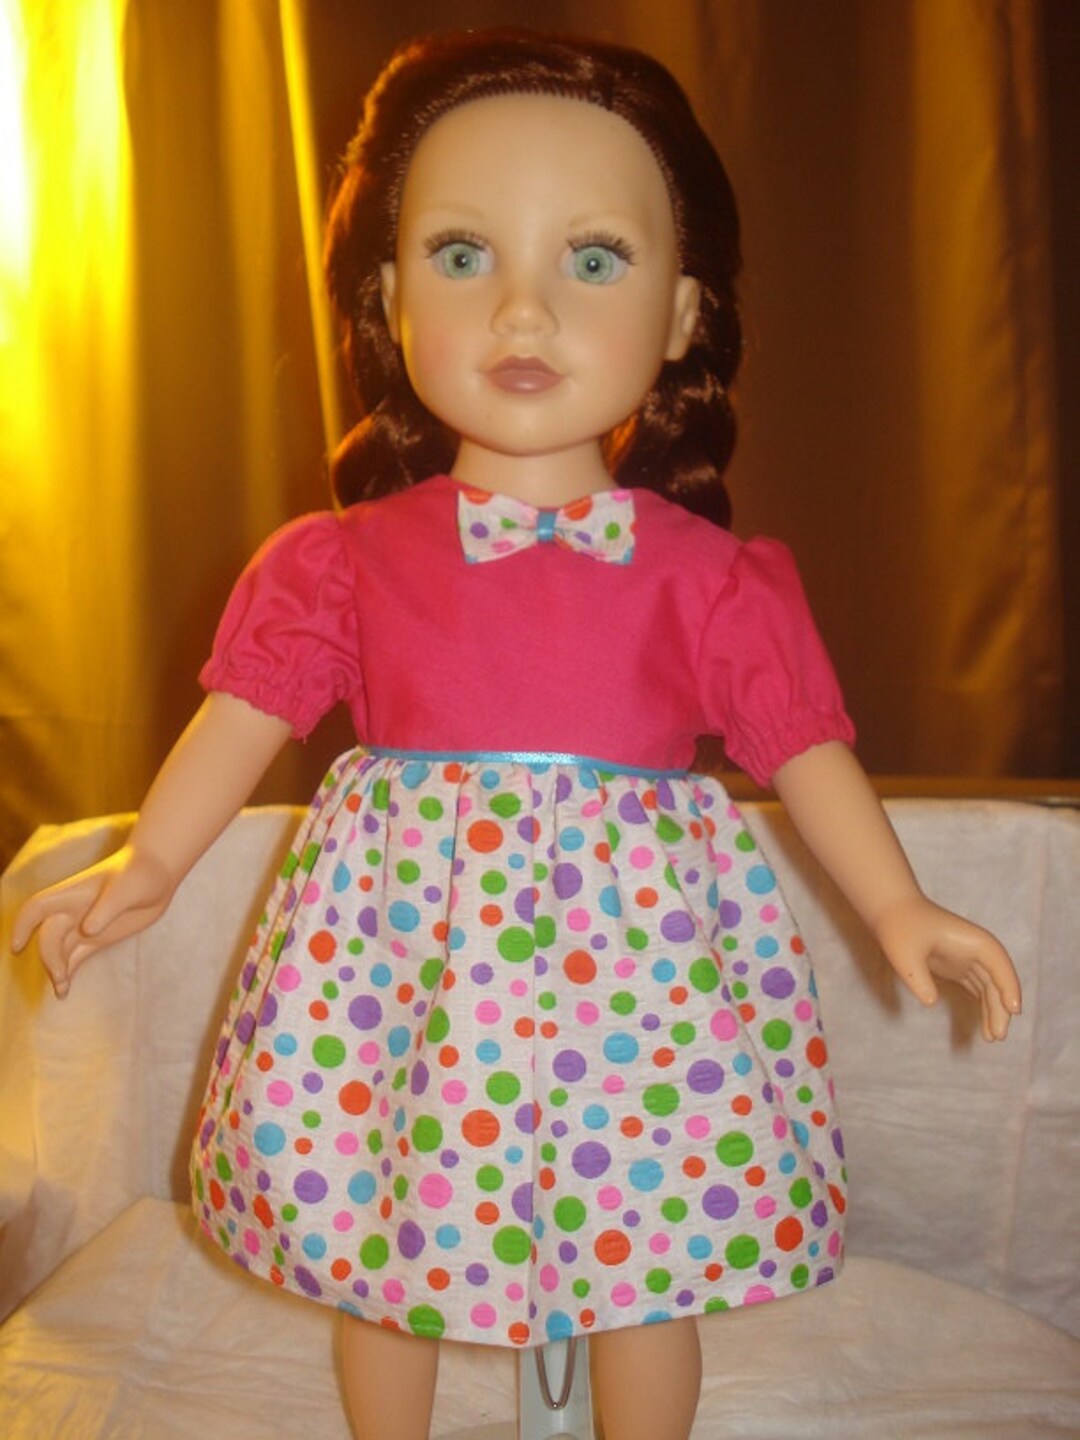 Pink and Colorful Polka Dot Full Dress for 18 Inch Dolls - Etsy